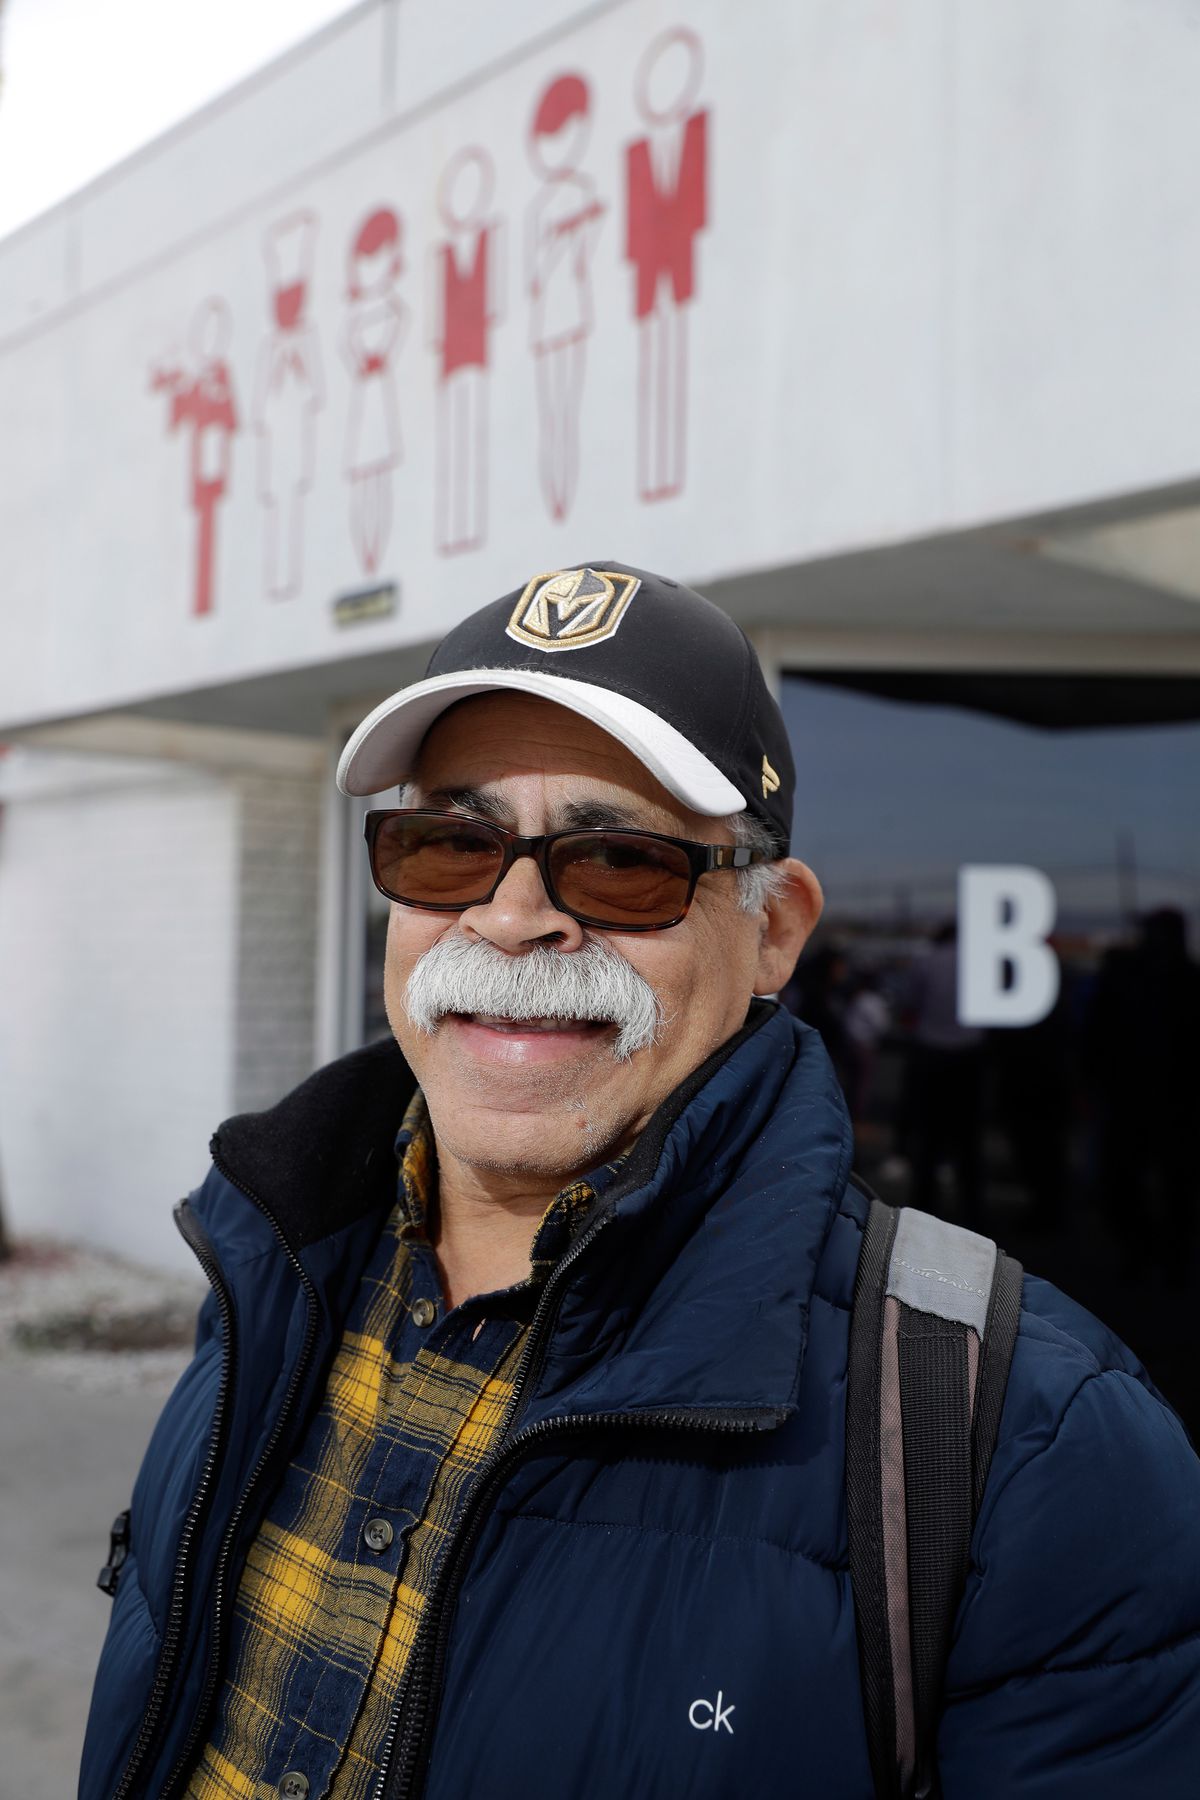 A man wearing sunglasses and a cap, with a neat mustache, poses outside the Culinary Union hall.